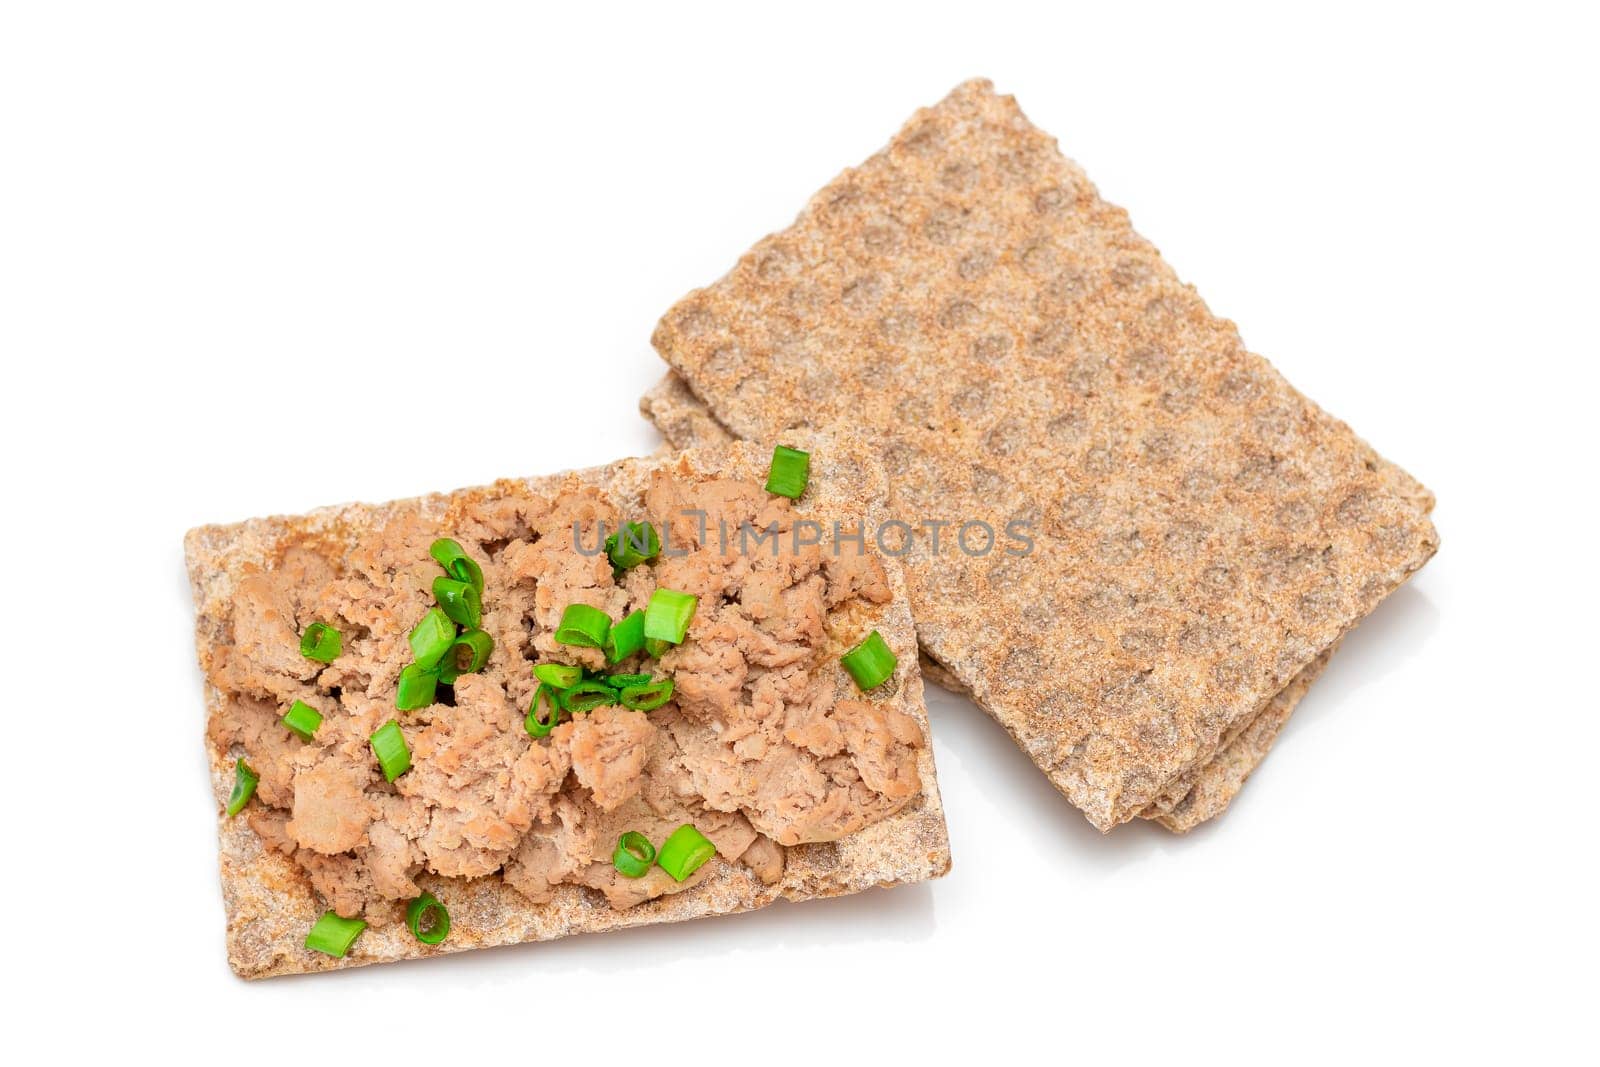 Crispy Sandwich with Chicken Pate and Green Onions Isolated on White Background - Top View. Whole Grain Bread with Liver Pate. Diet Breakfast and Healthy Food